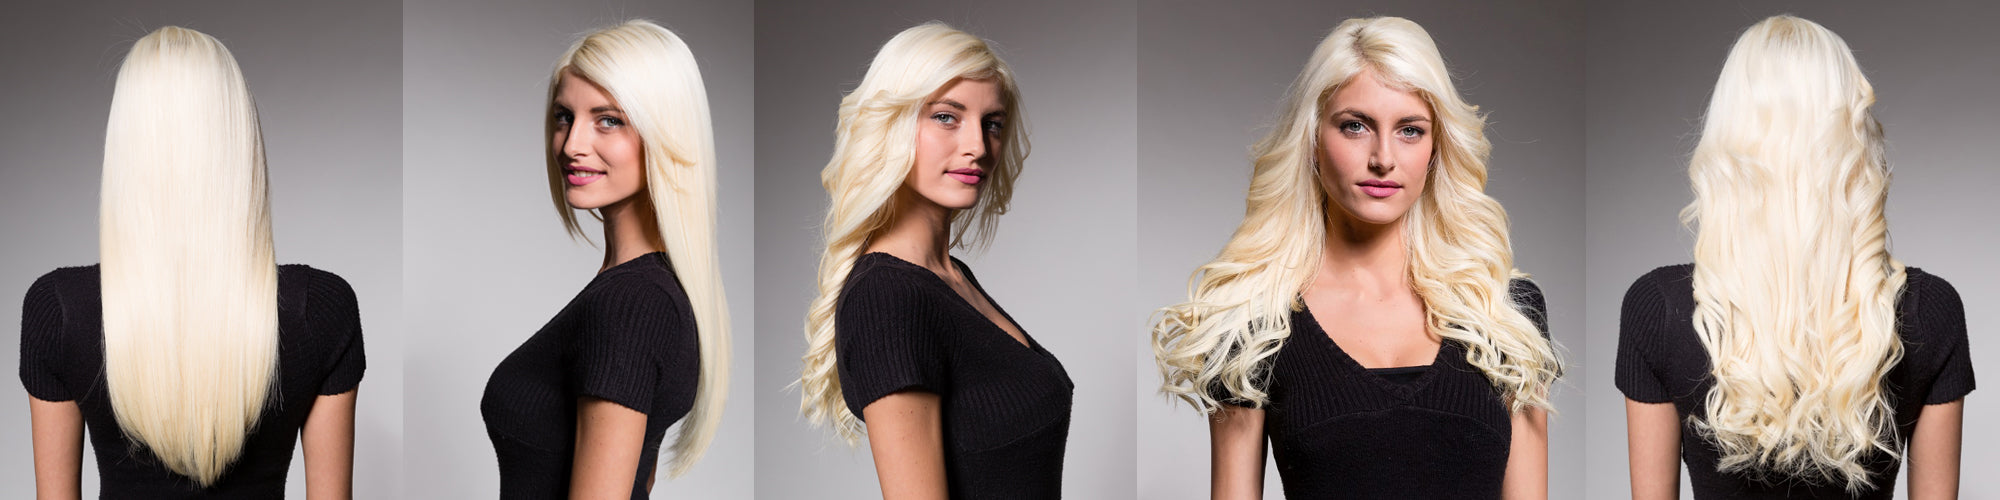 WHY DO BLOND HAIR EXTENSIONS COST MORE?